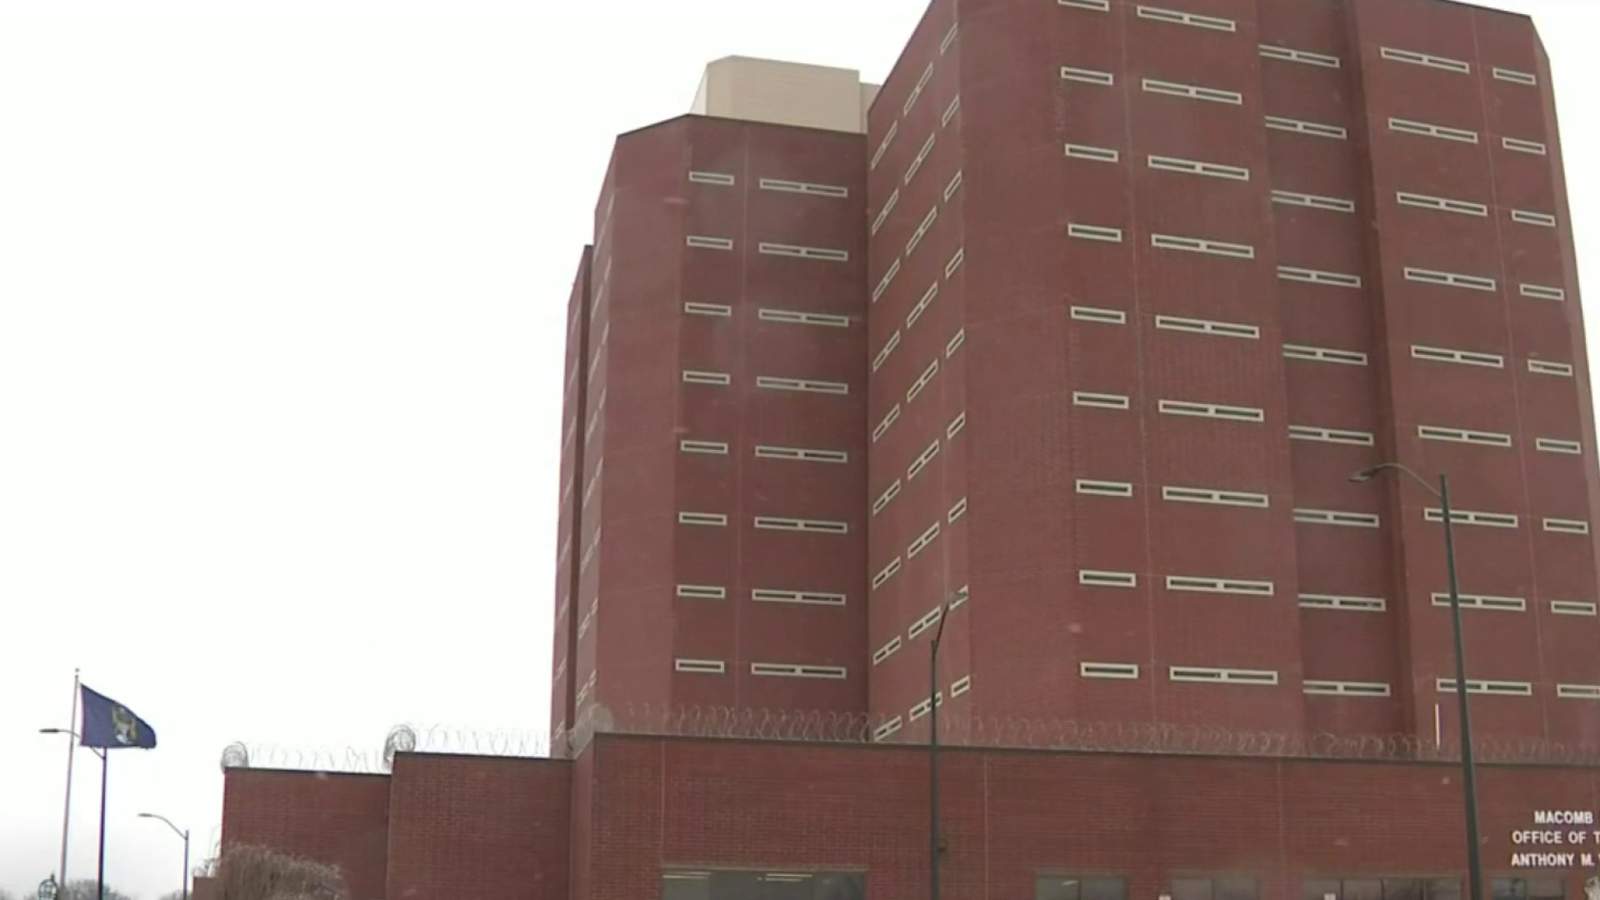 New inmates to be tested for COVID-19 before entry after outbreak hits Macomb County Jail